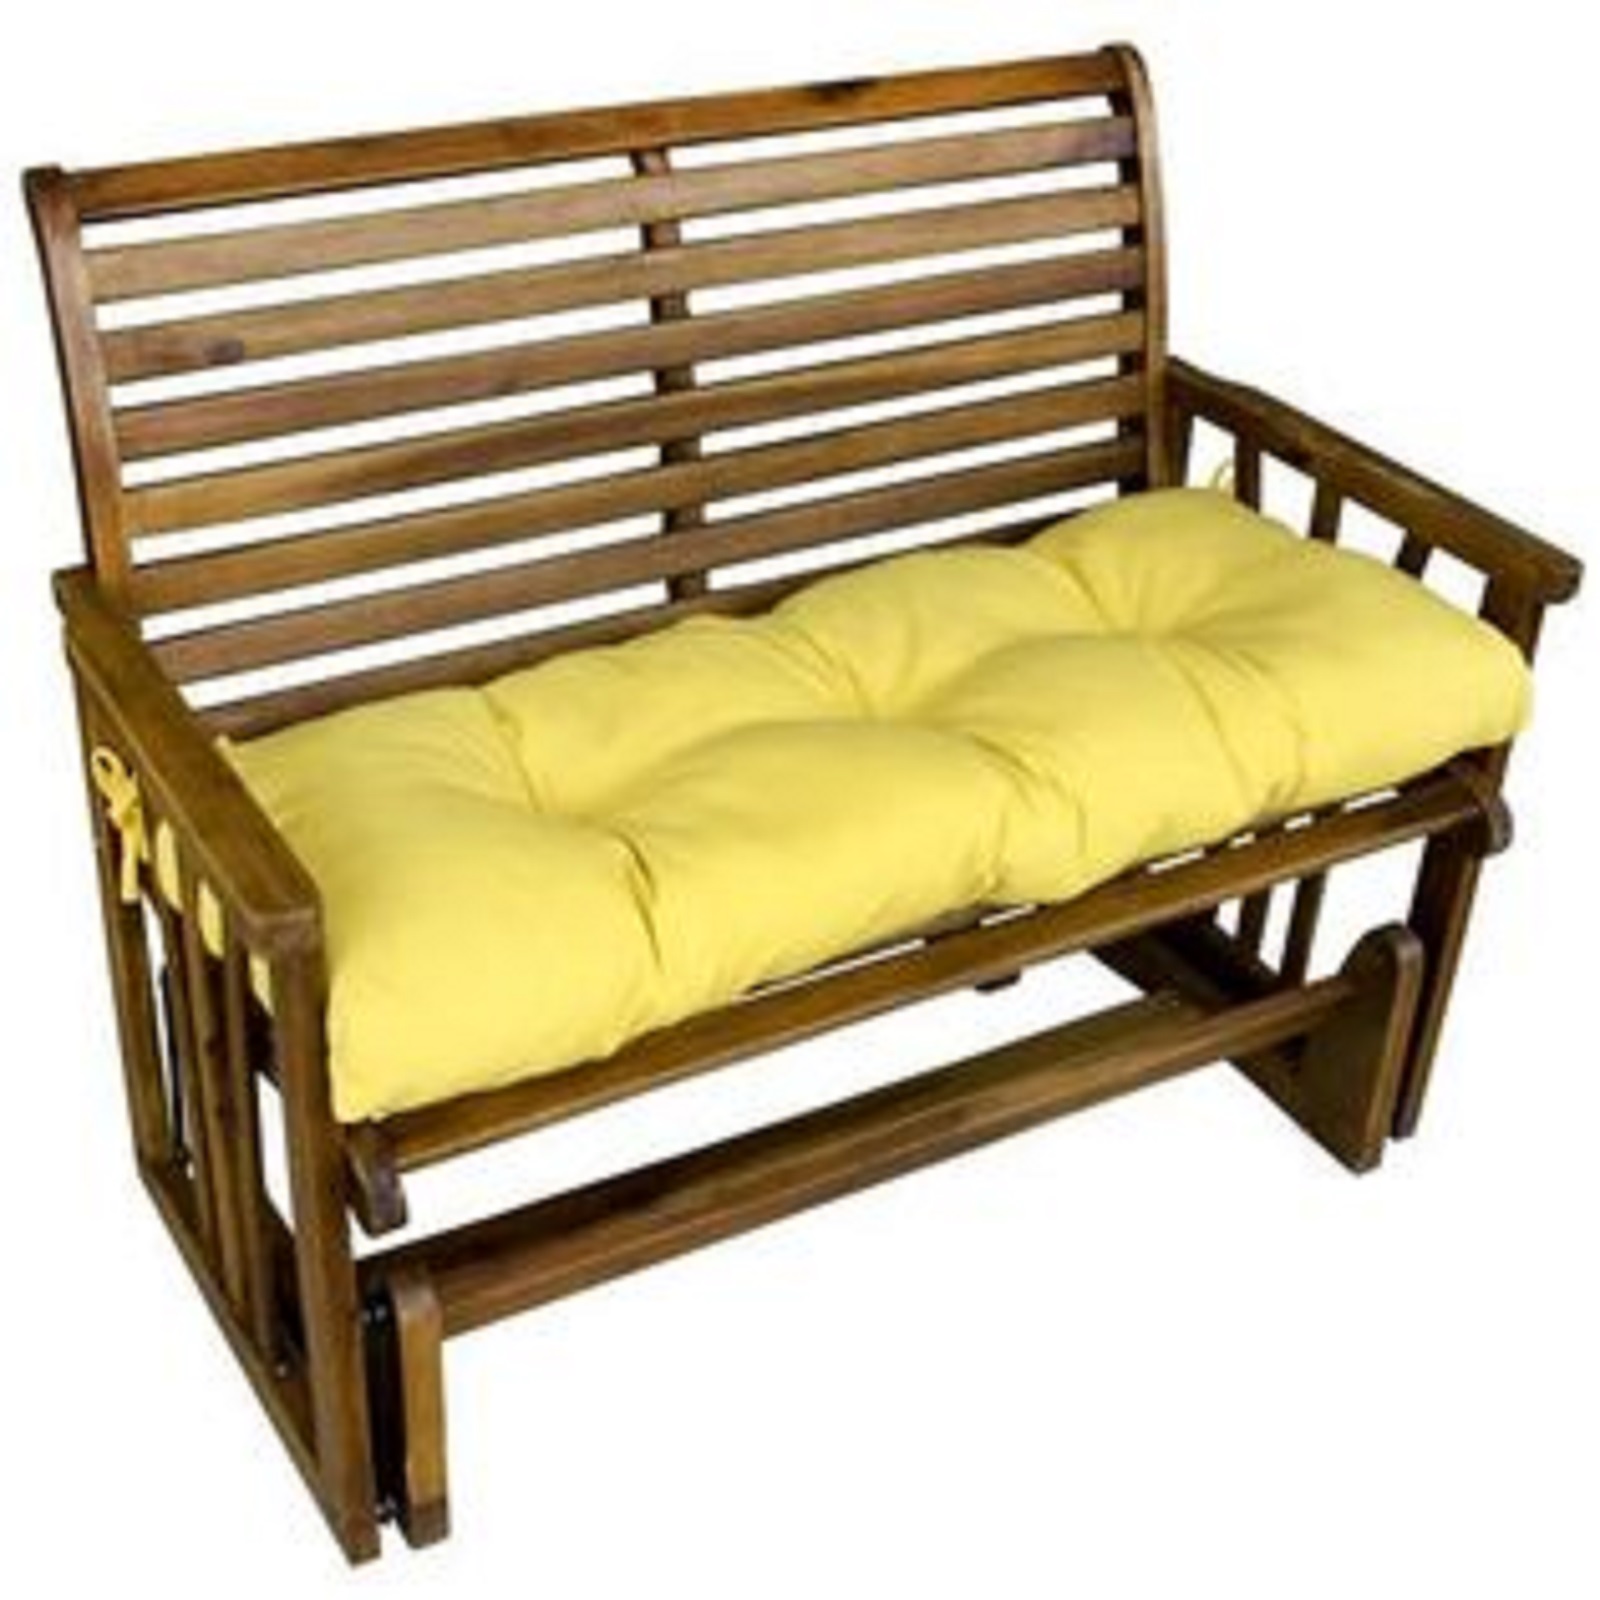 44 inch Outdoor Swing/Bench Cushion, Canary